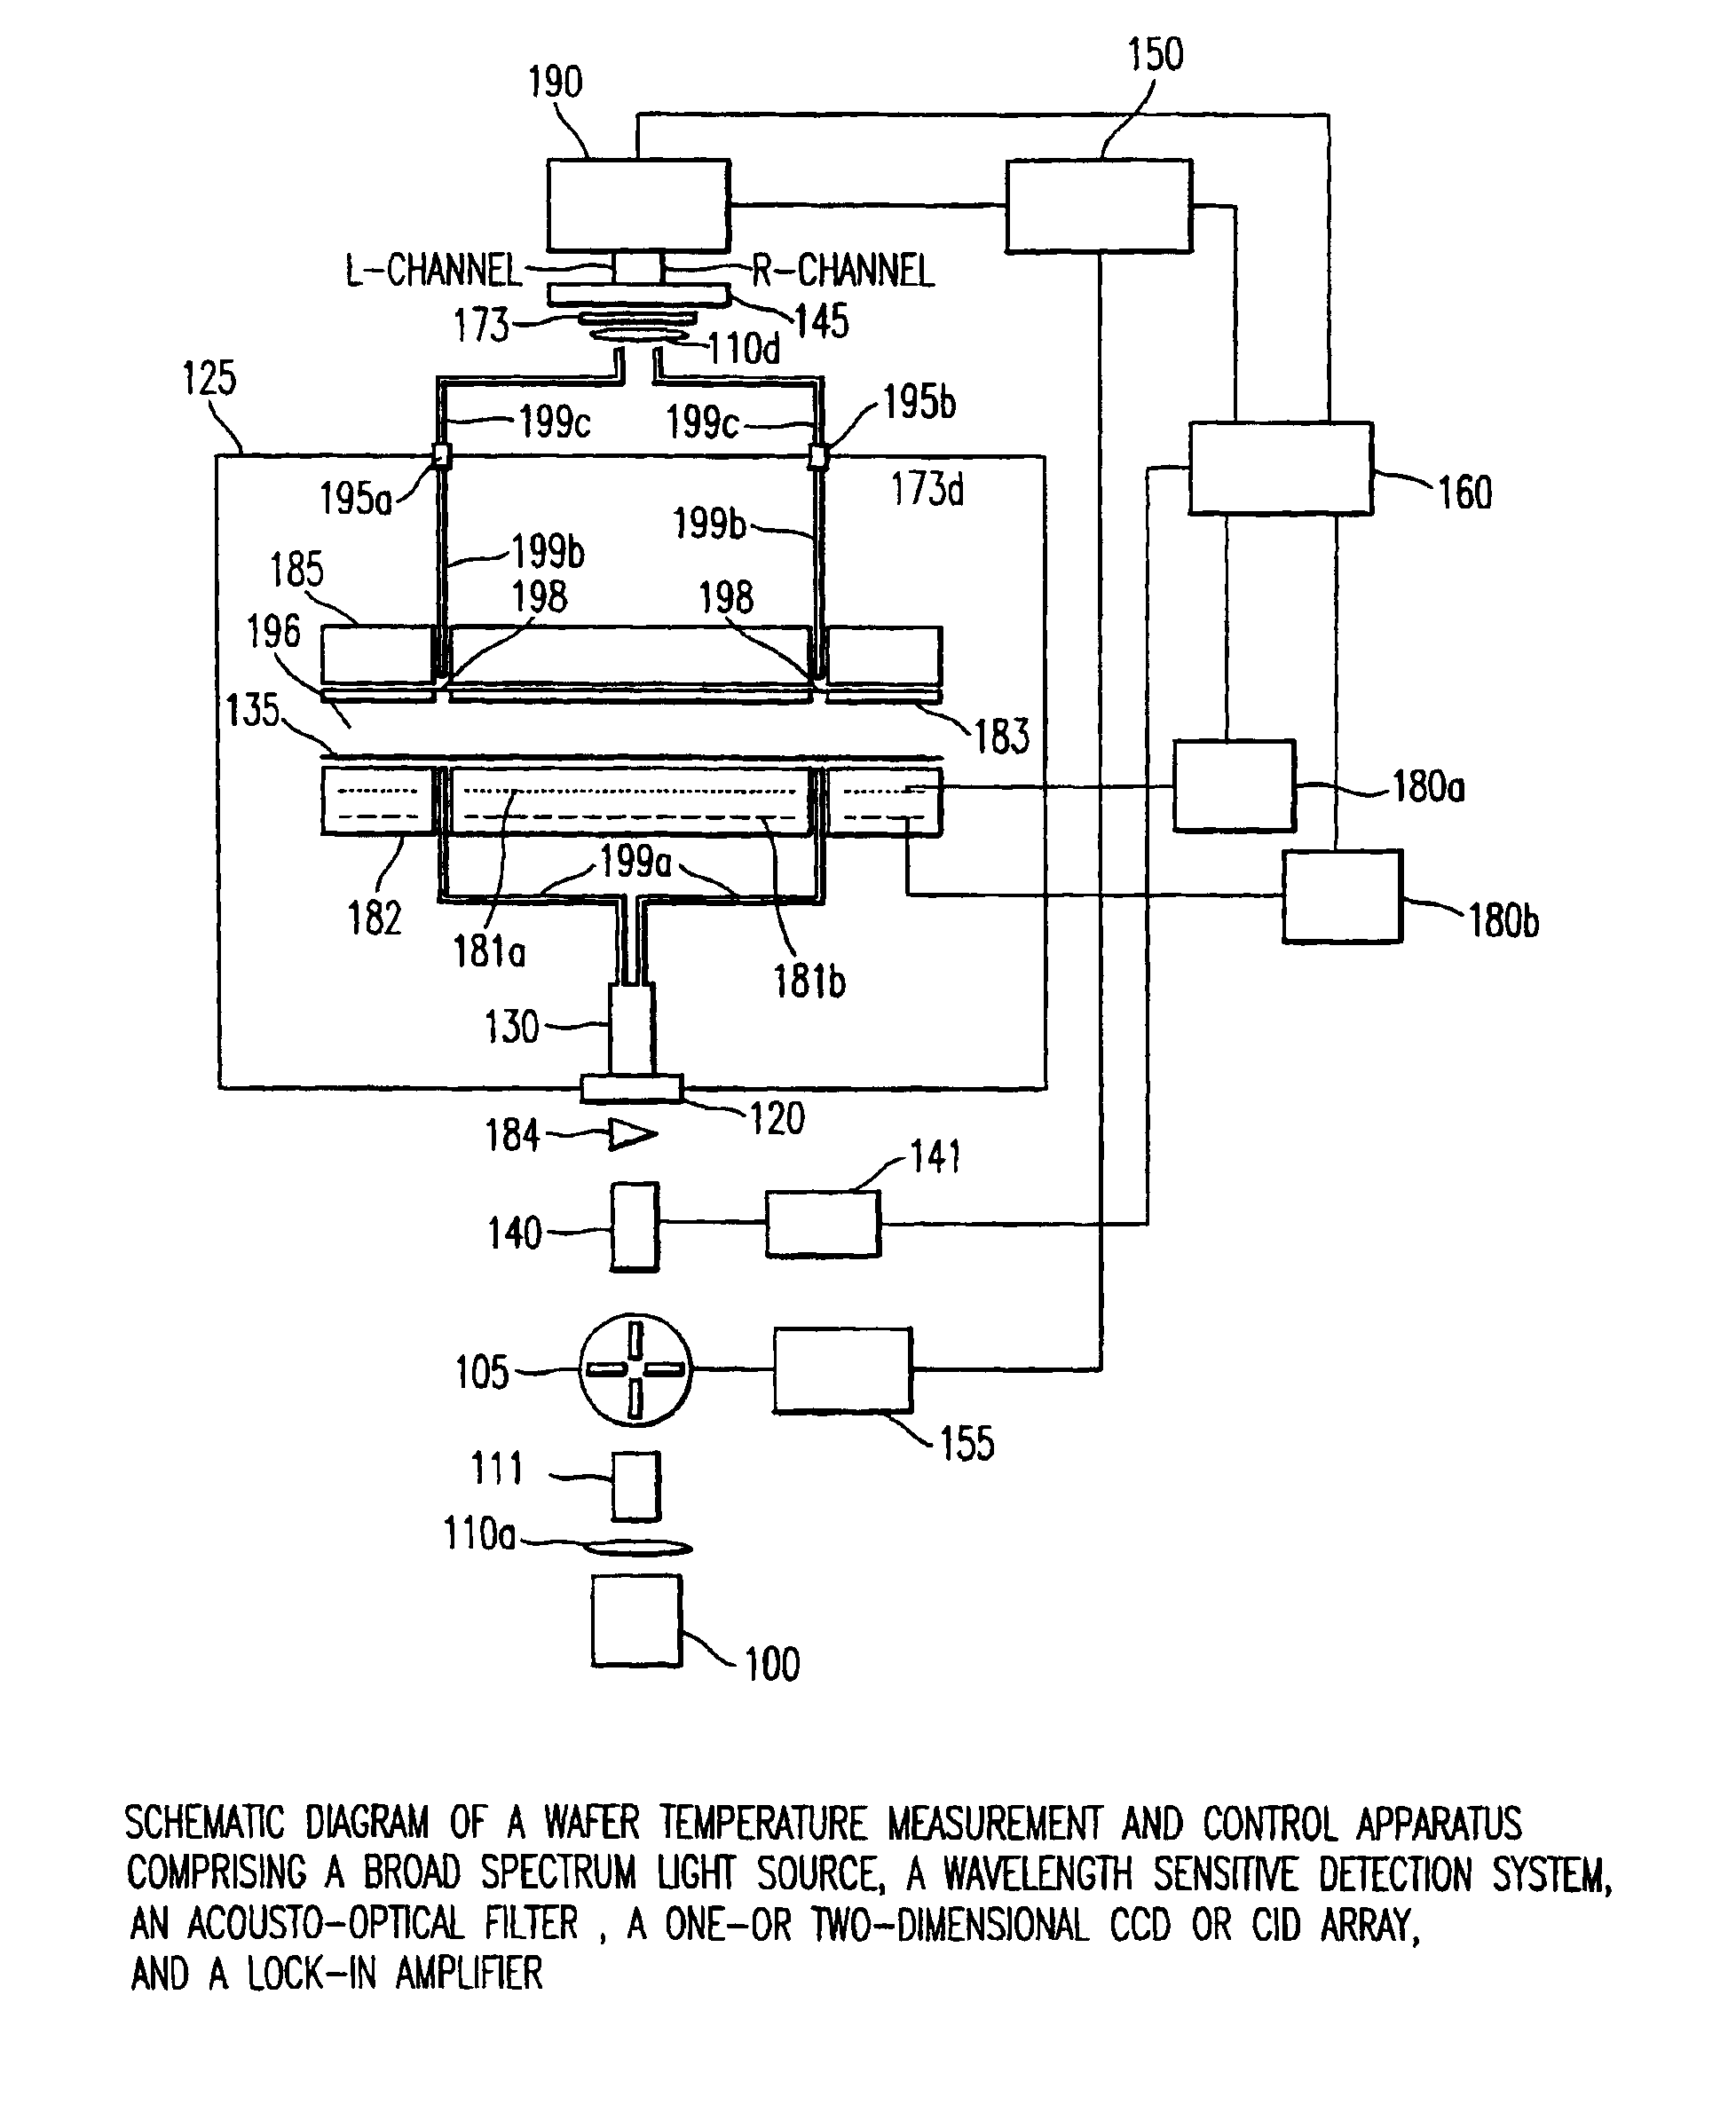 Method of wafer band-edge measurement using transmission spectroscopy and a process for controlling the temperature uniformity of a wafer